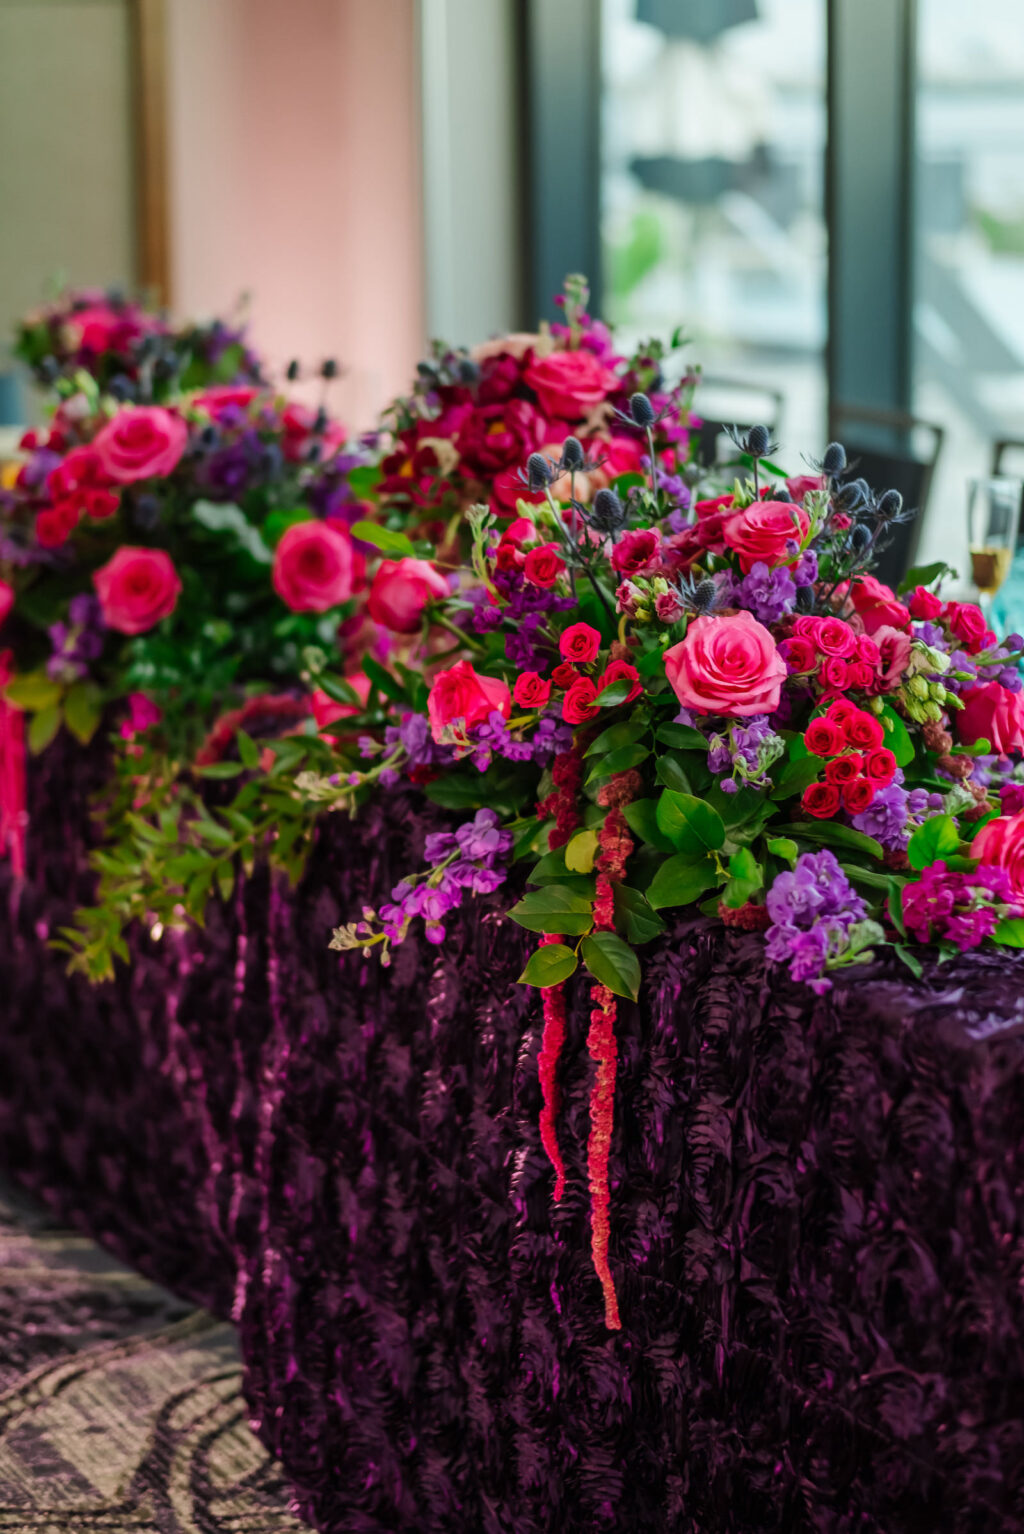 Jewel Tone Wedding Reception Decor, Long Table with Purple Linen, Pink Roses, Purple Flowers, Thistle, Hanging Amaranthus, Greenery Floral Arrangements | Tampa Bay Wedding Florist Iza's Flowers | Wedding Planner Perfecting the Plan